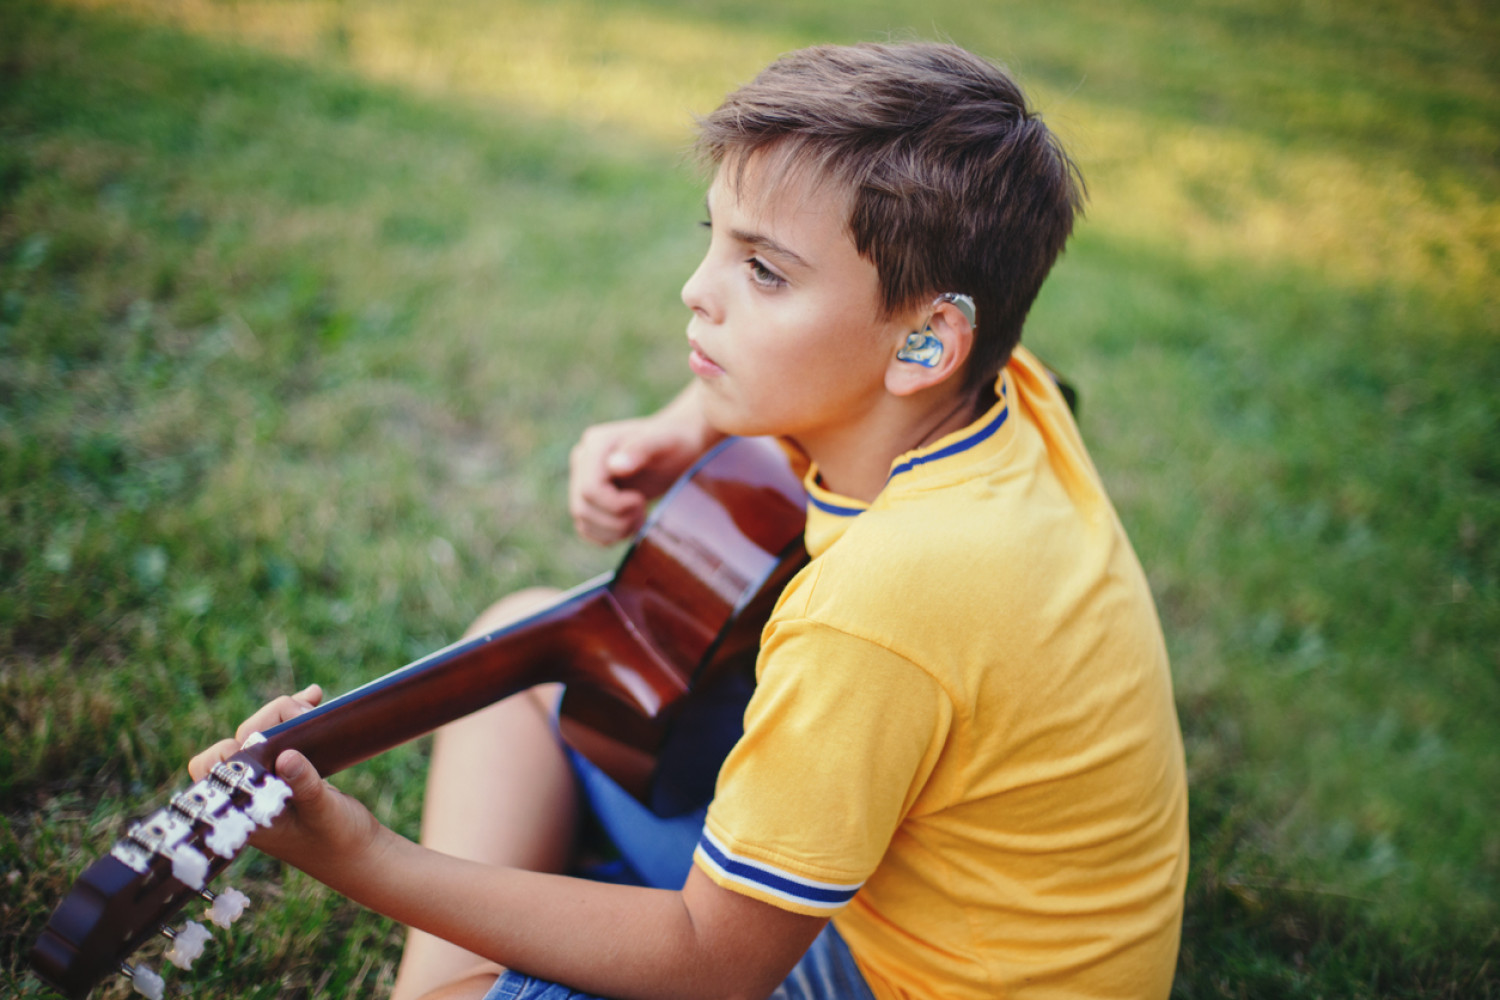 A young student with a hearing aid deeply engaged in playing the guitar, reflecting the empowerment of students with disabilities through Assistive Technology.